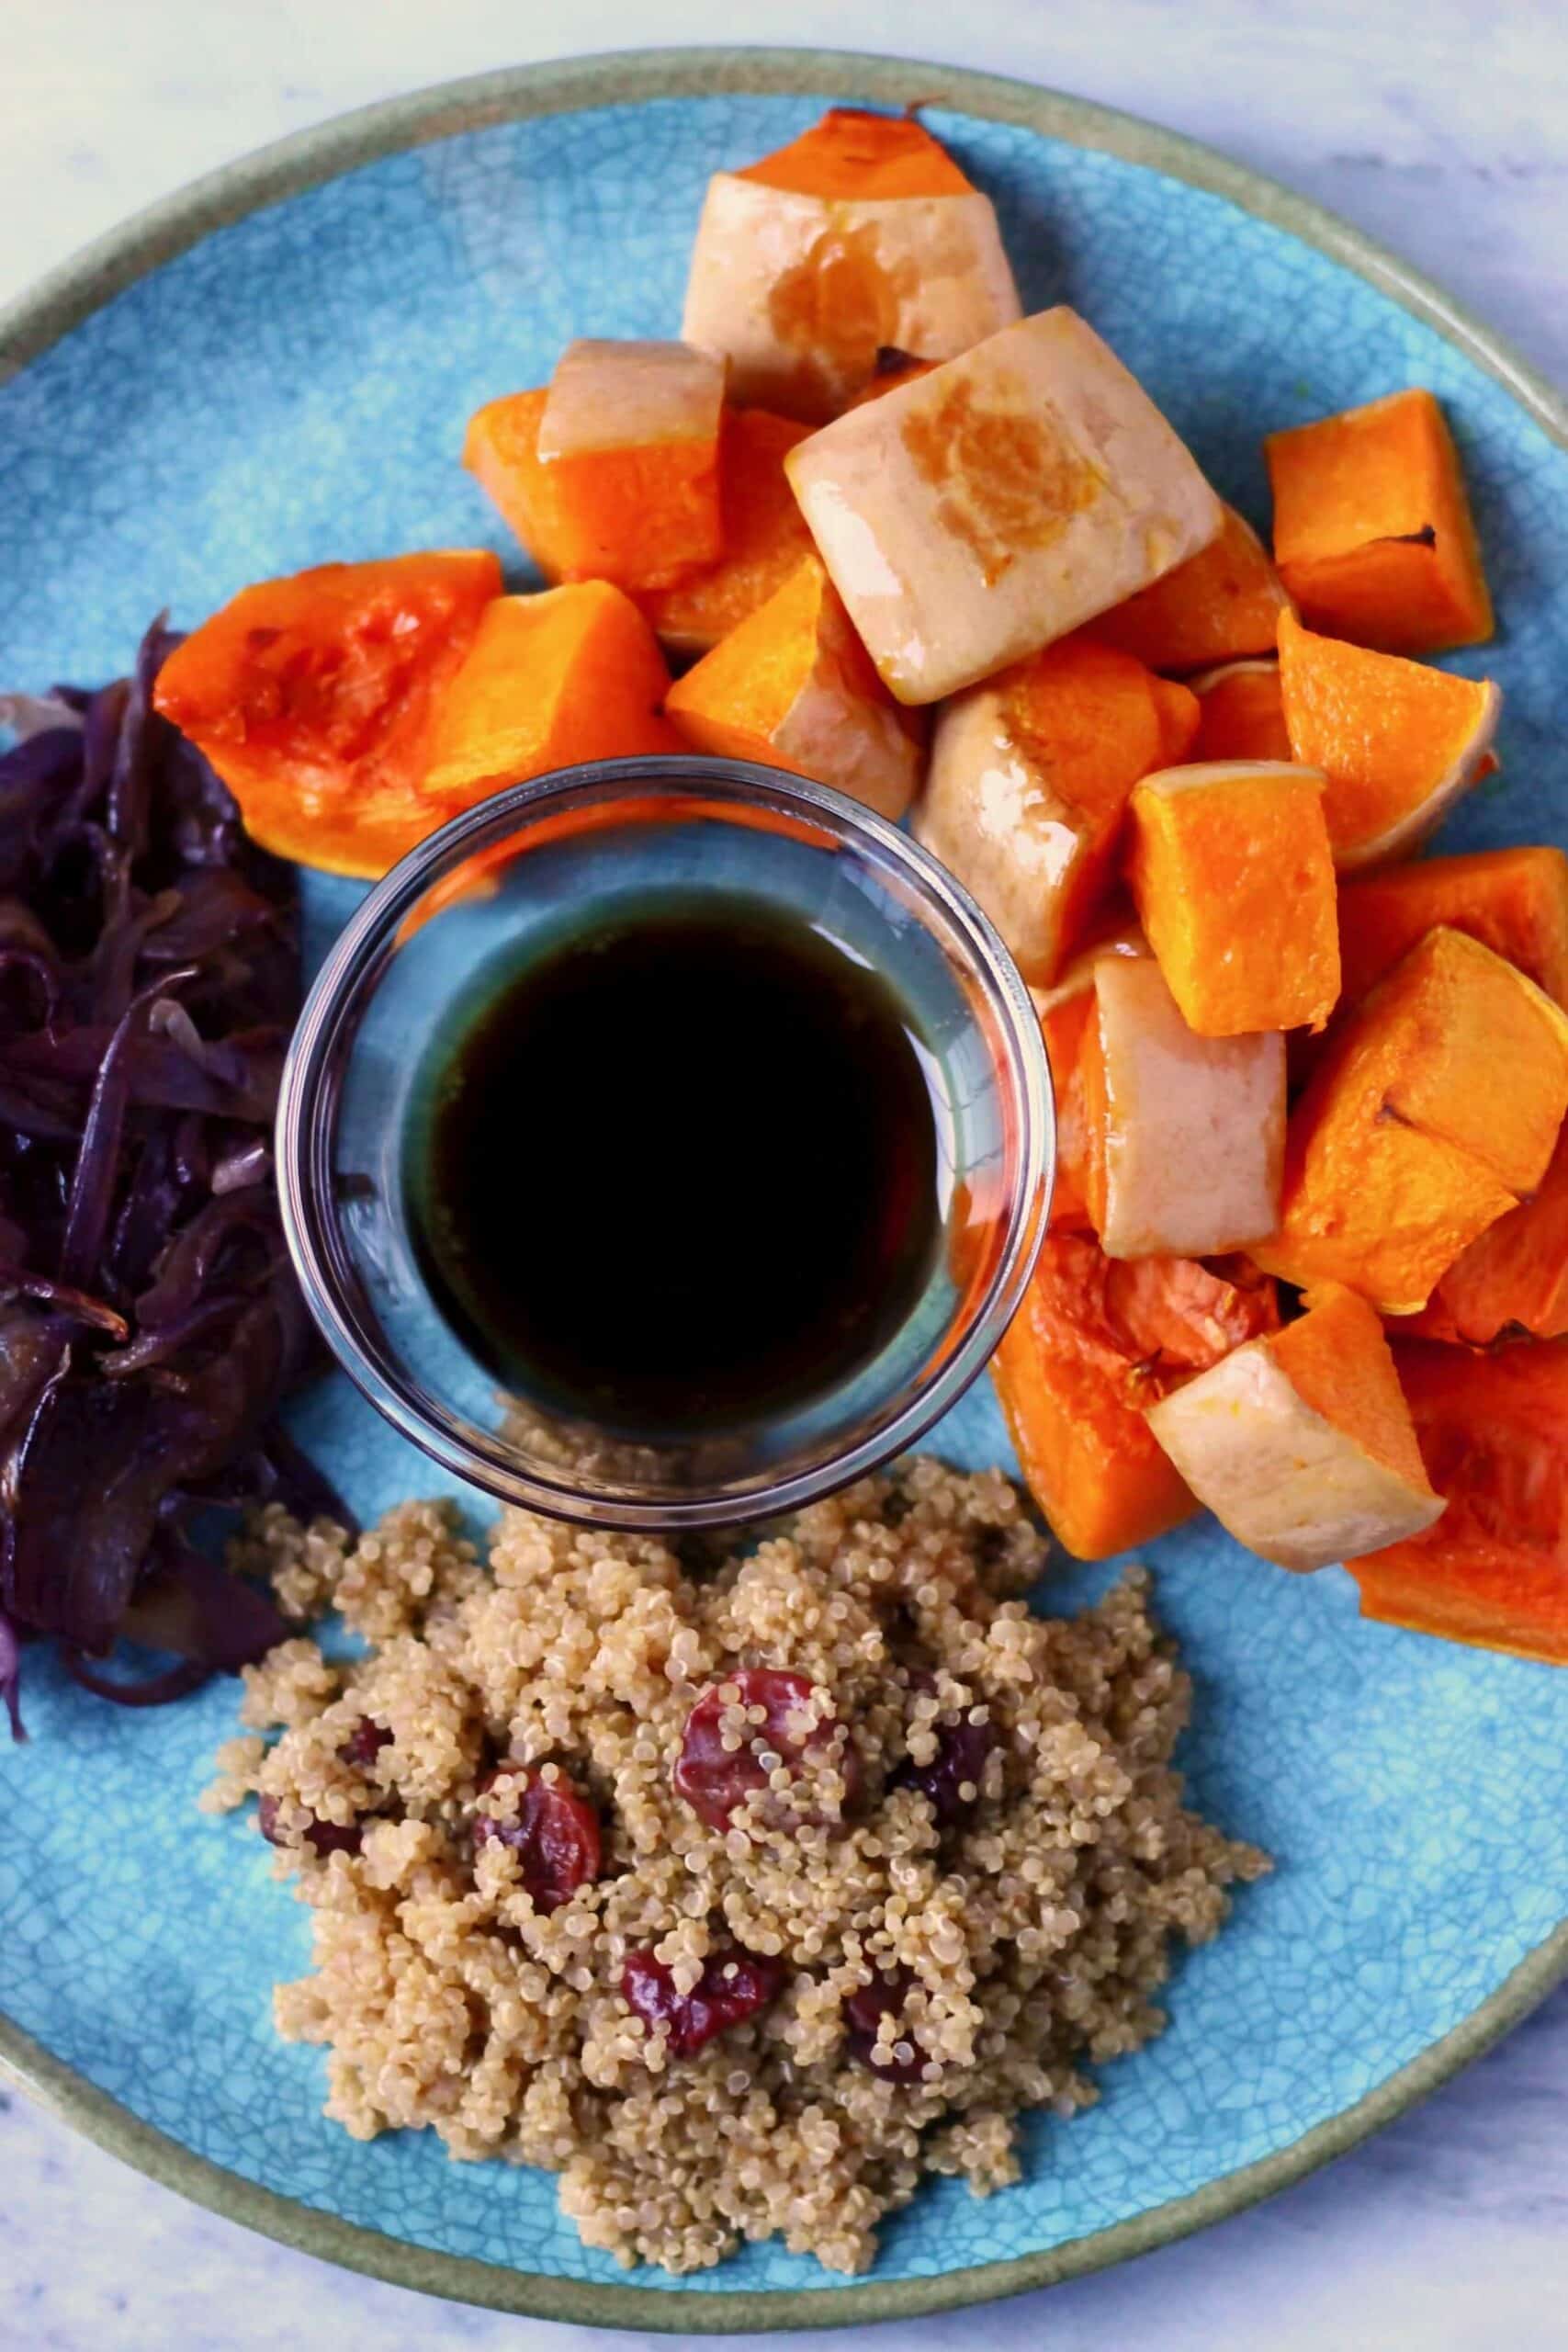 Roasted pumpkin cubes, cooked quinoa and dried cranberries, fried red onion slices and a small bowl of dressing on a plate